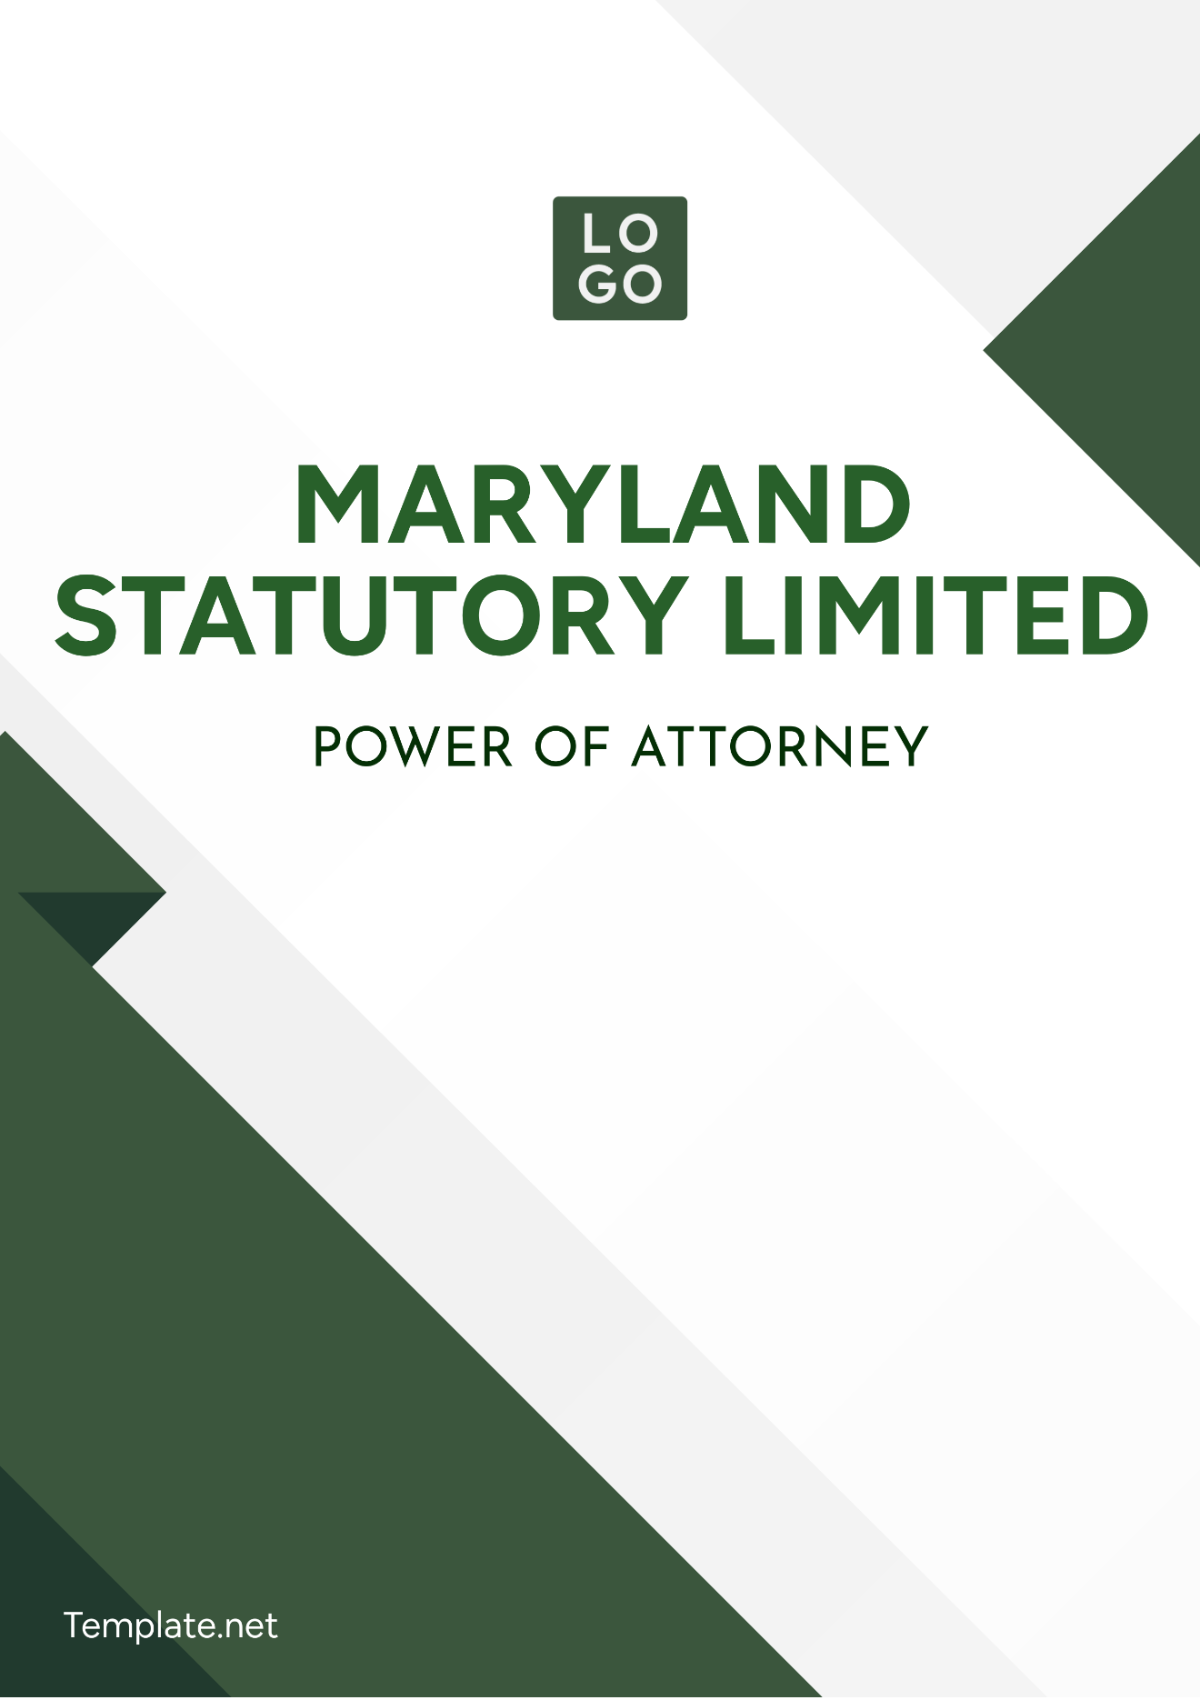 Maryland Statutory Limited Power of Attorney Template